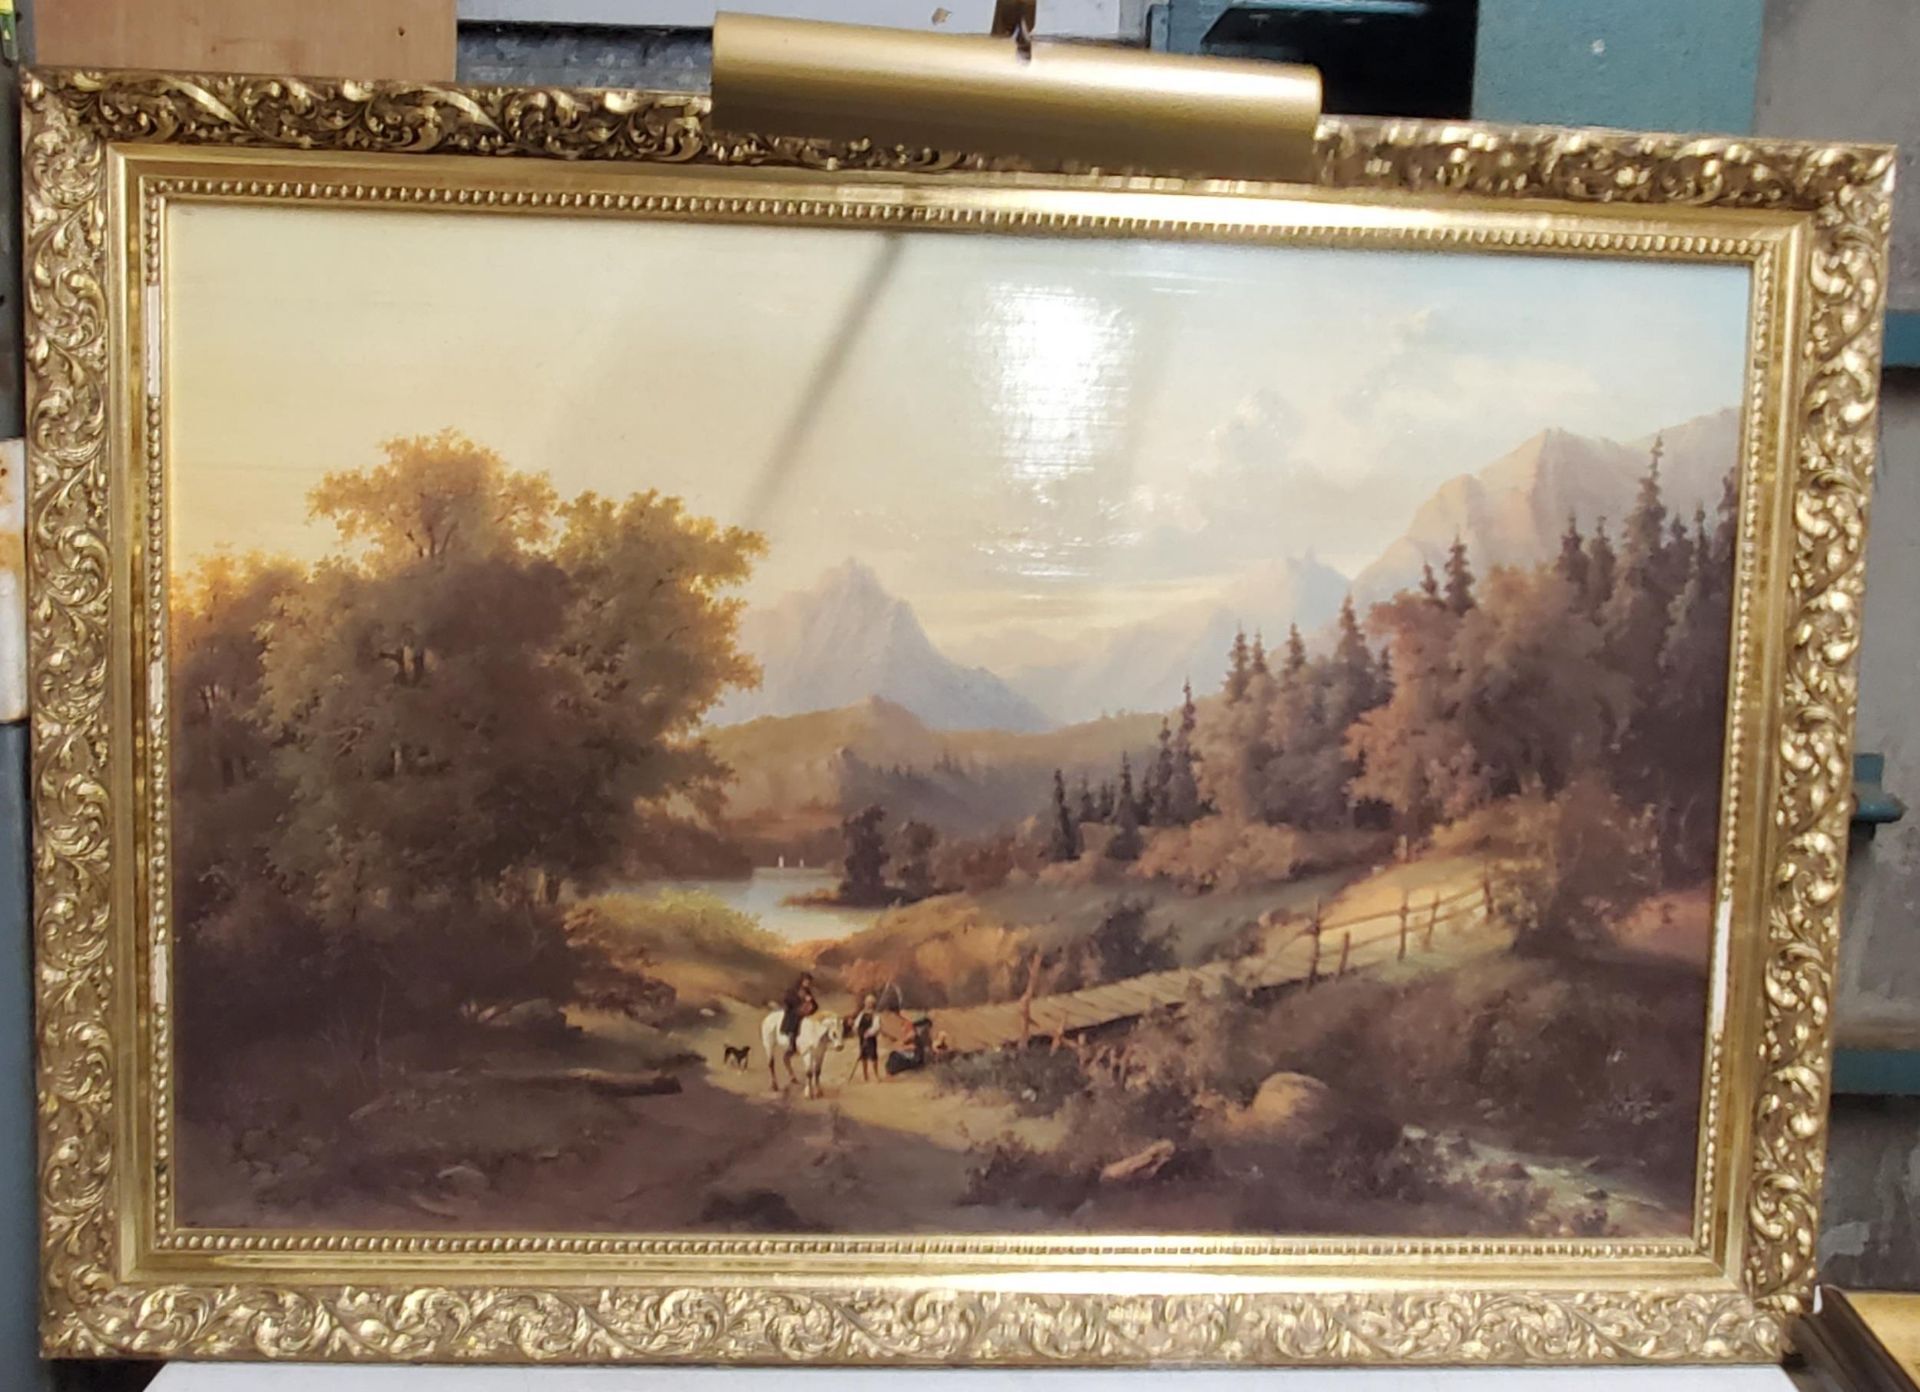 A LARGE PRINT OF PEOPLE AT A MOUNTAIN LAKE WITH ORNATE FRAME AND PICTURE LIGHT